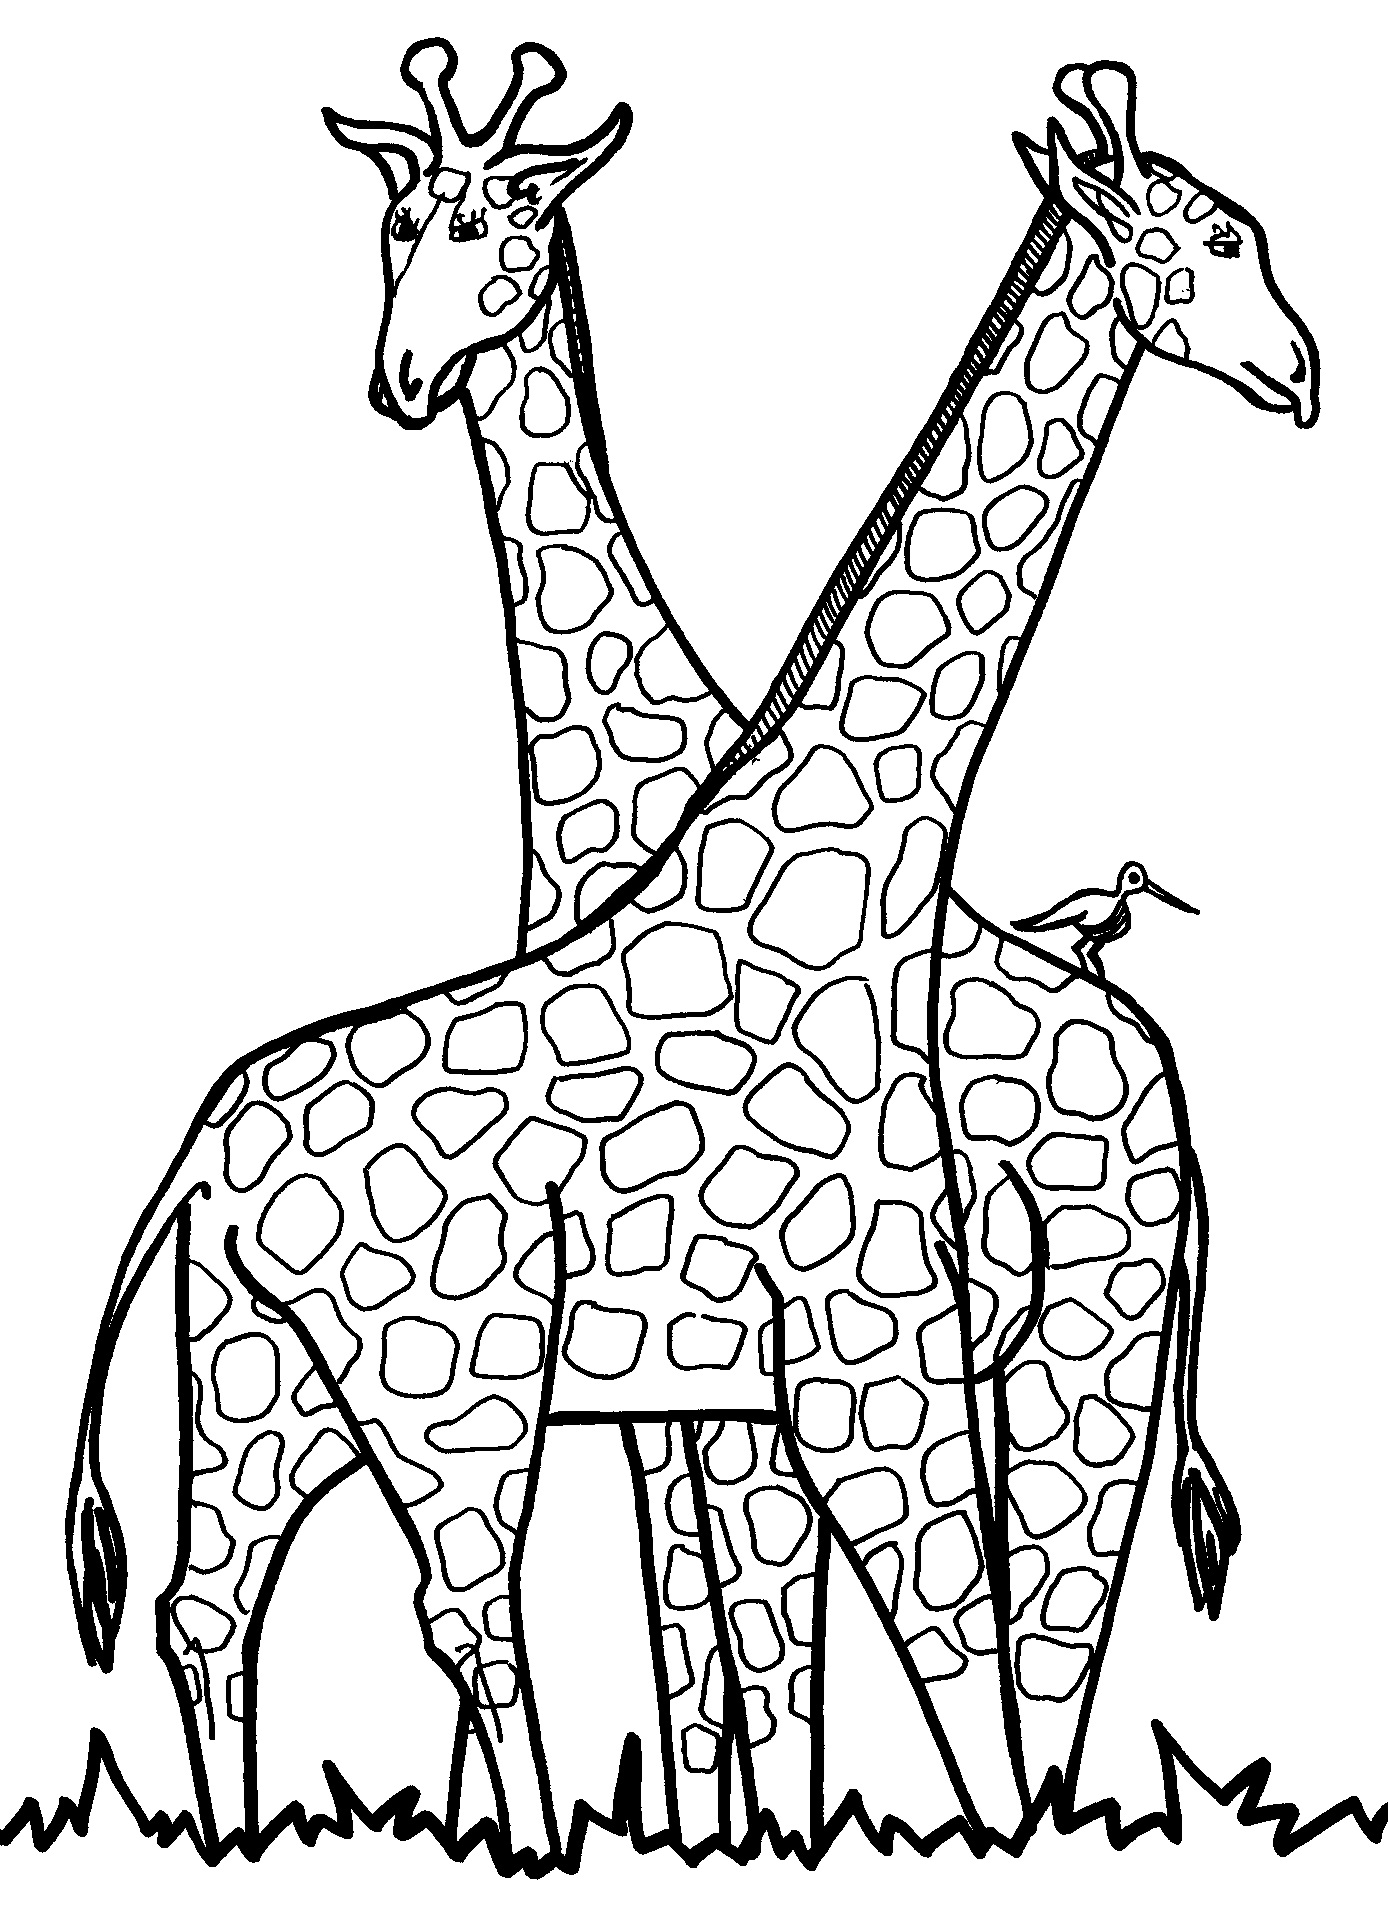 Coloring Pages of a Giraffe Coloring Page